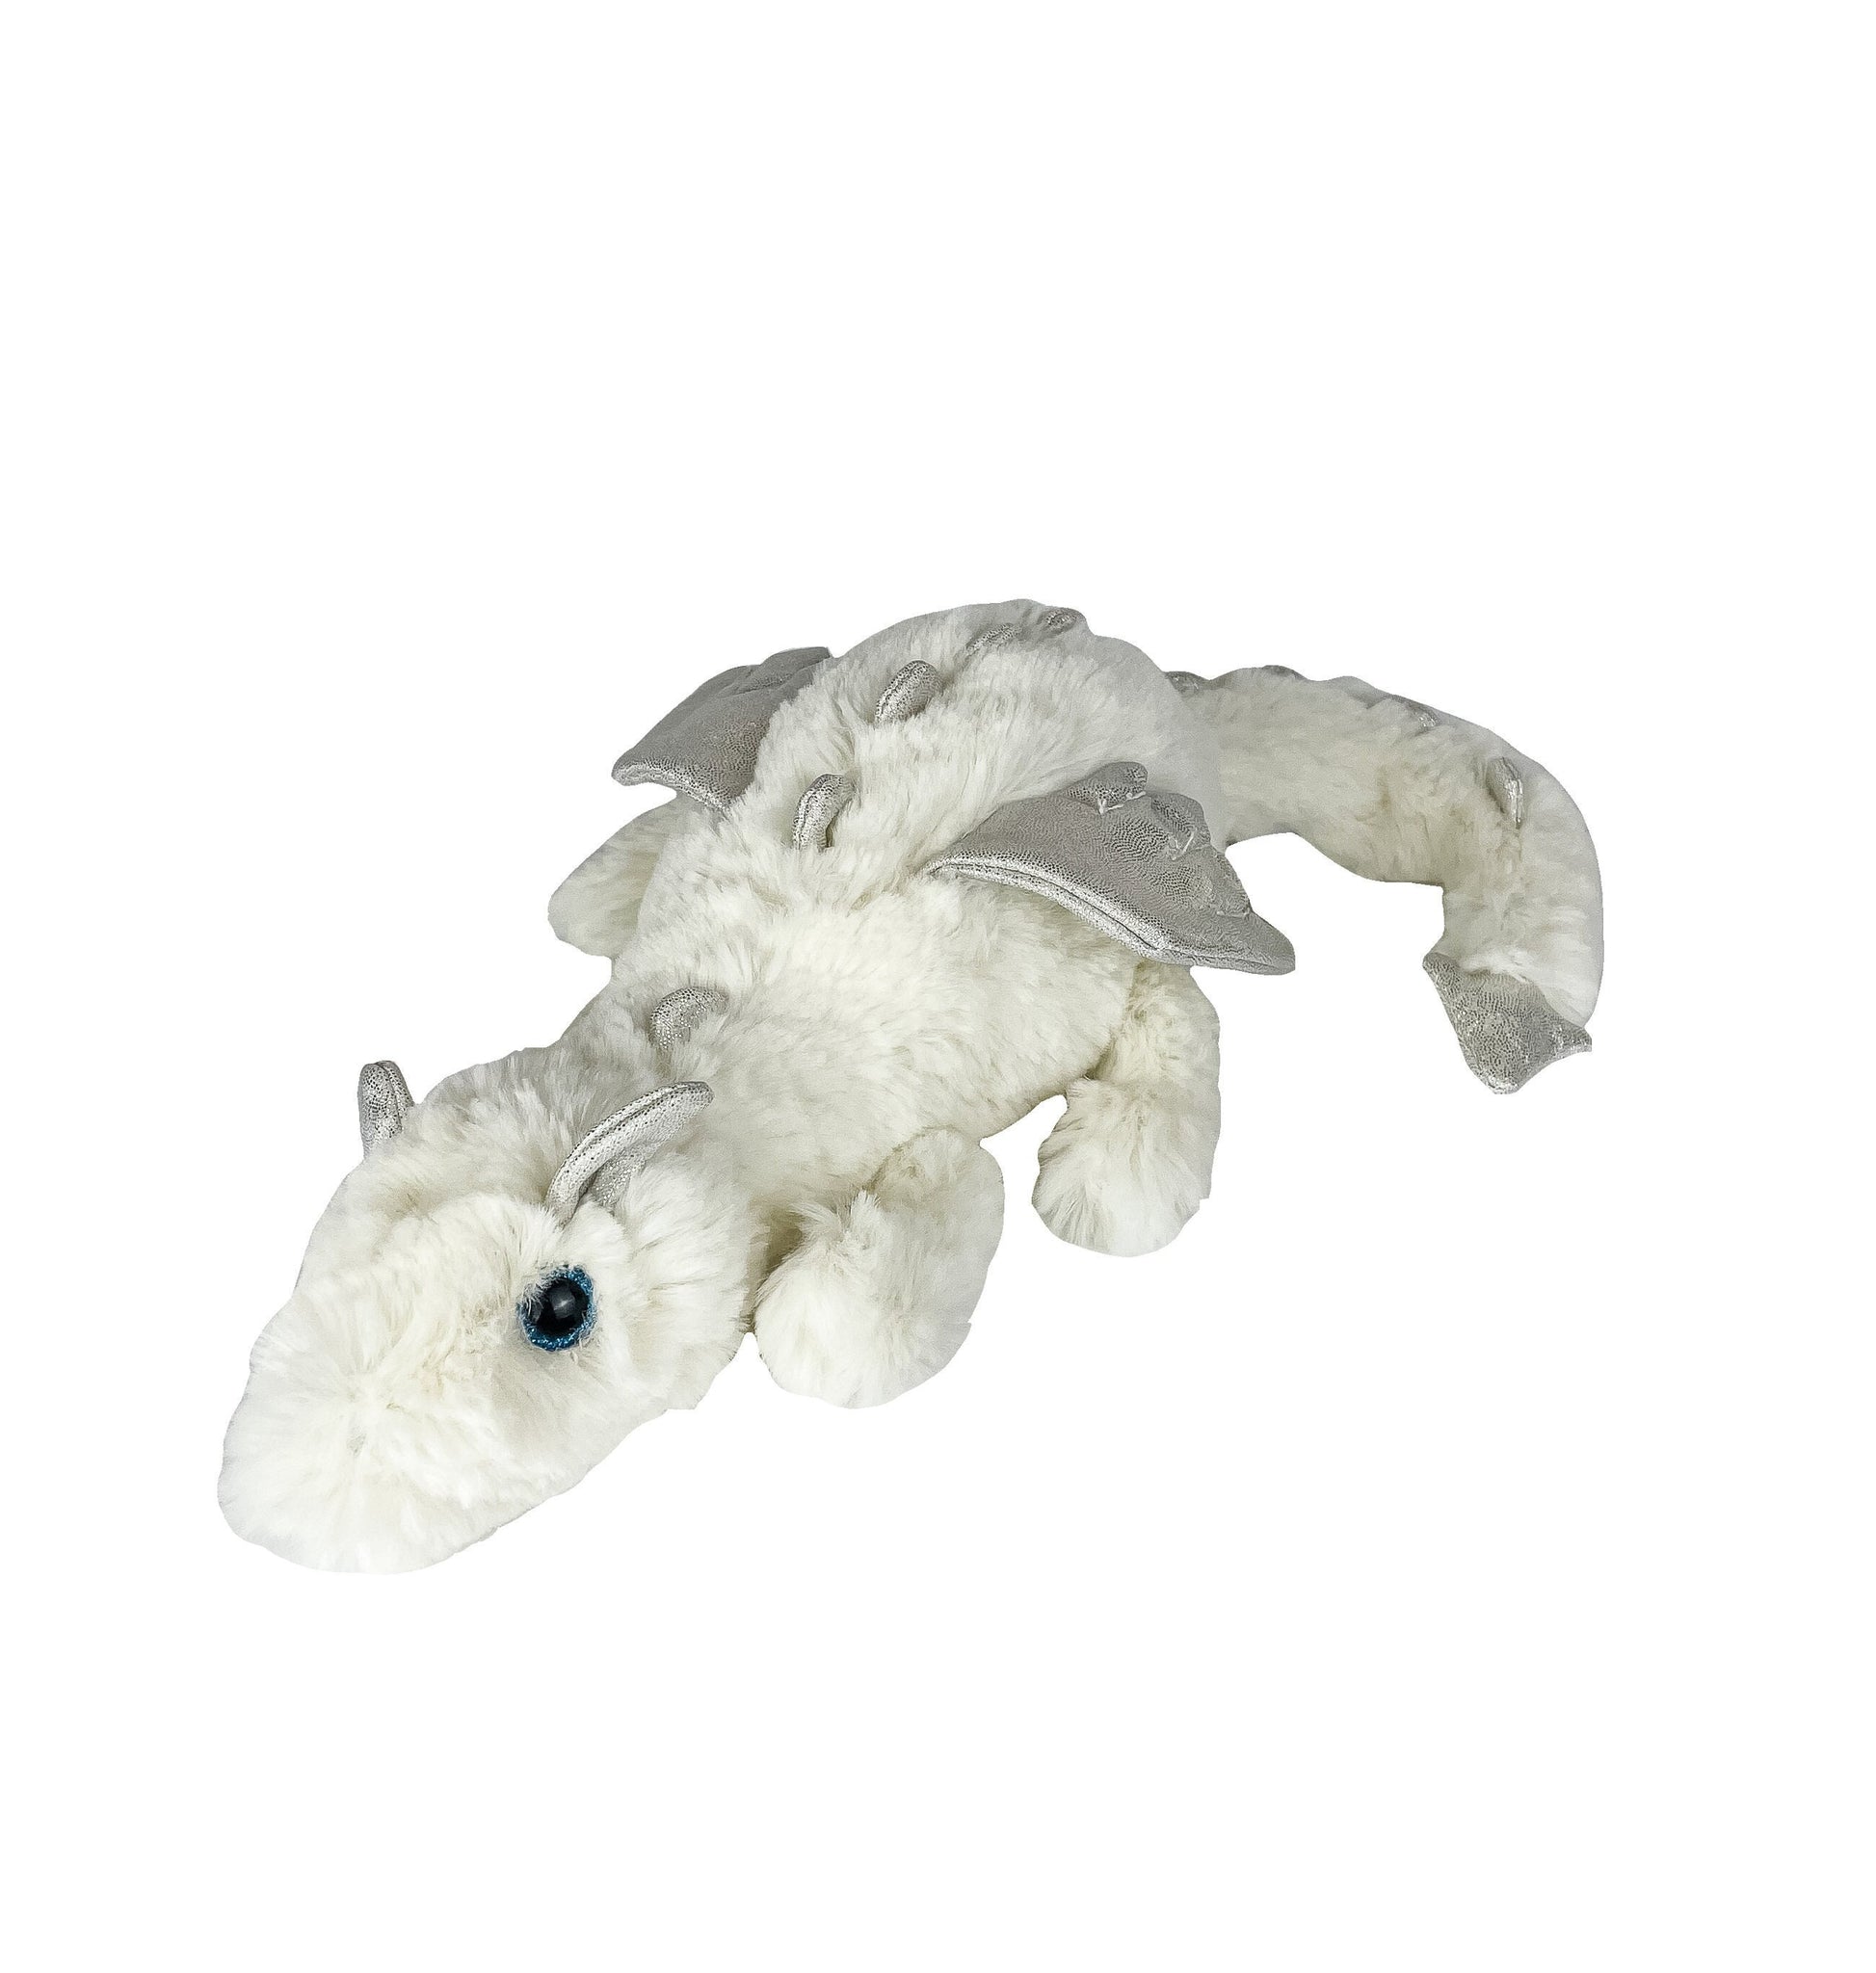 CLOUD DRAGON STUFFED Animal, 8 Inches, Order Stuffed or Unstuffed With